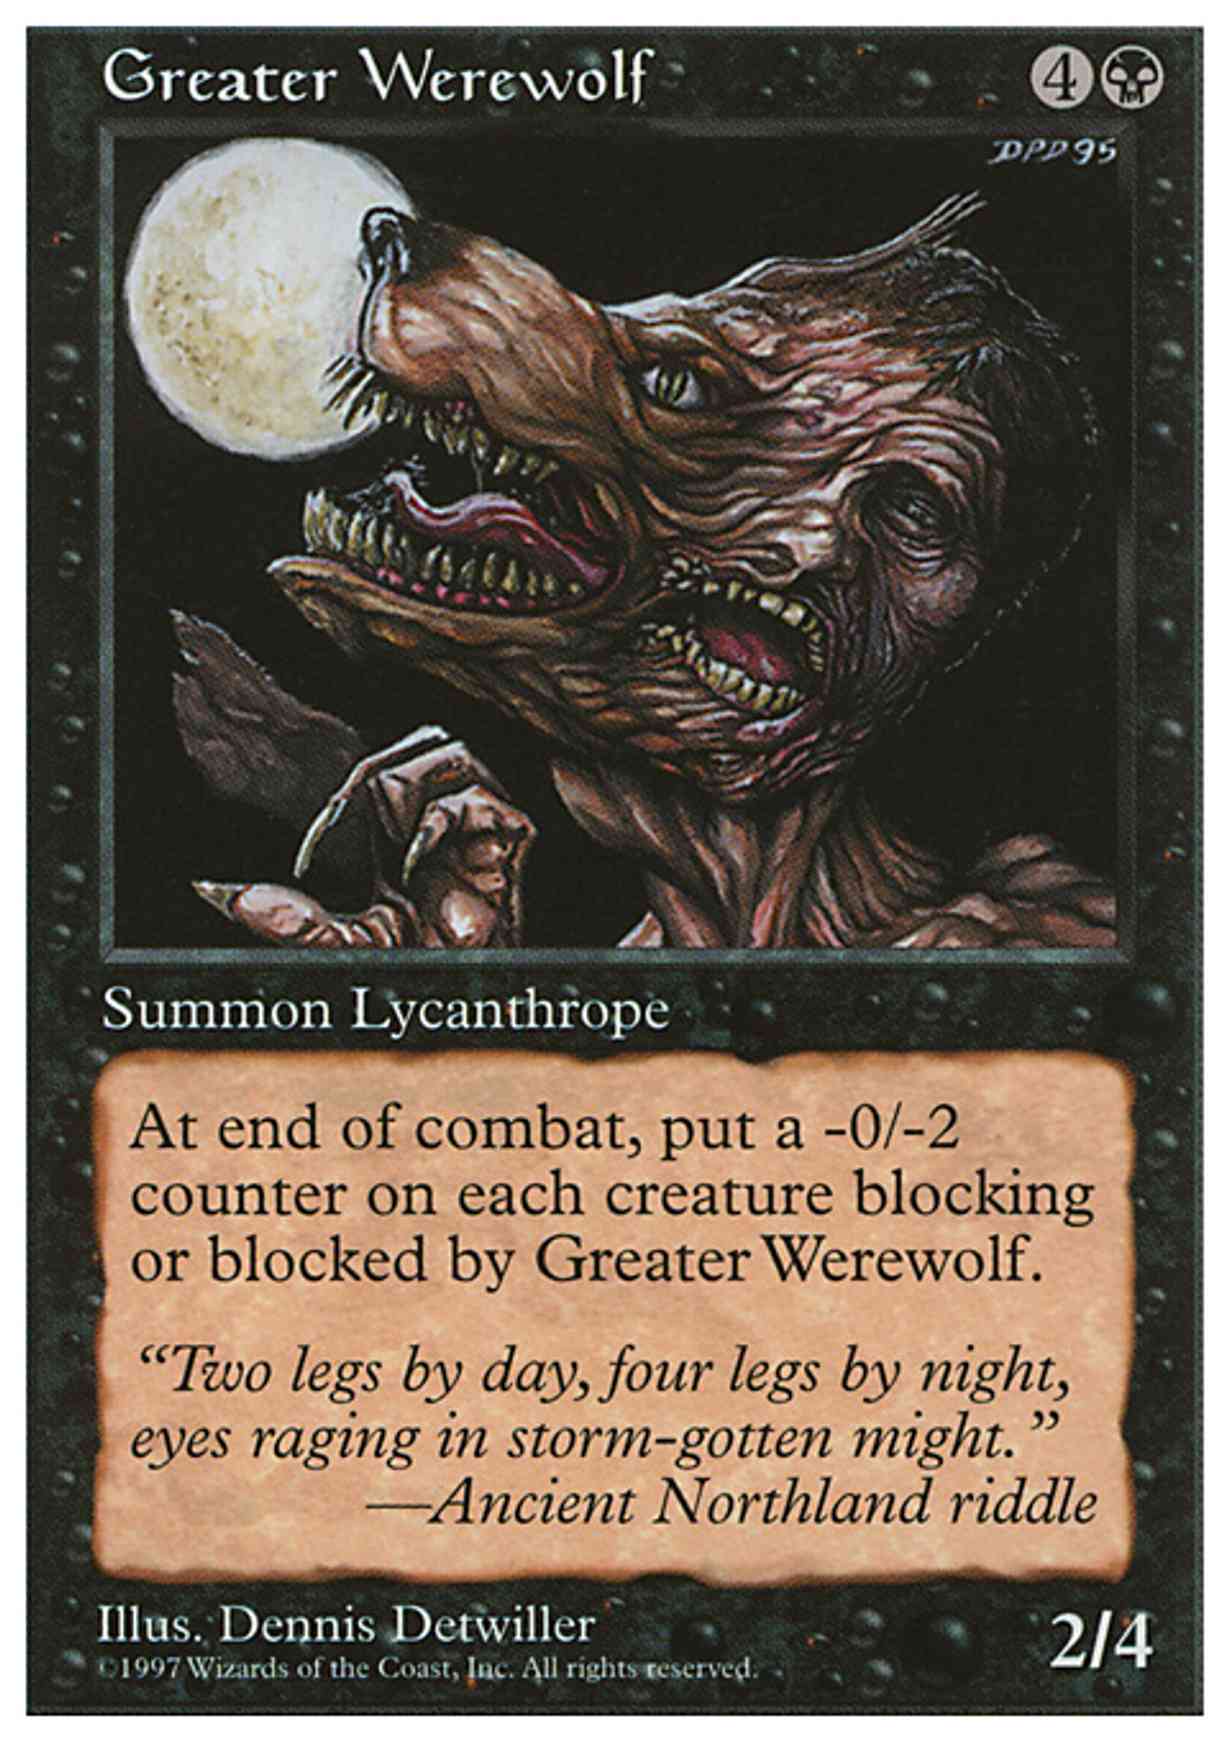 Greater Werewolf magic card front